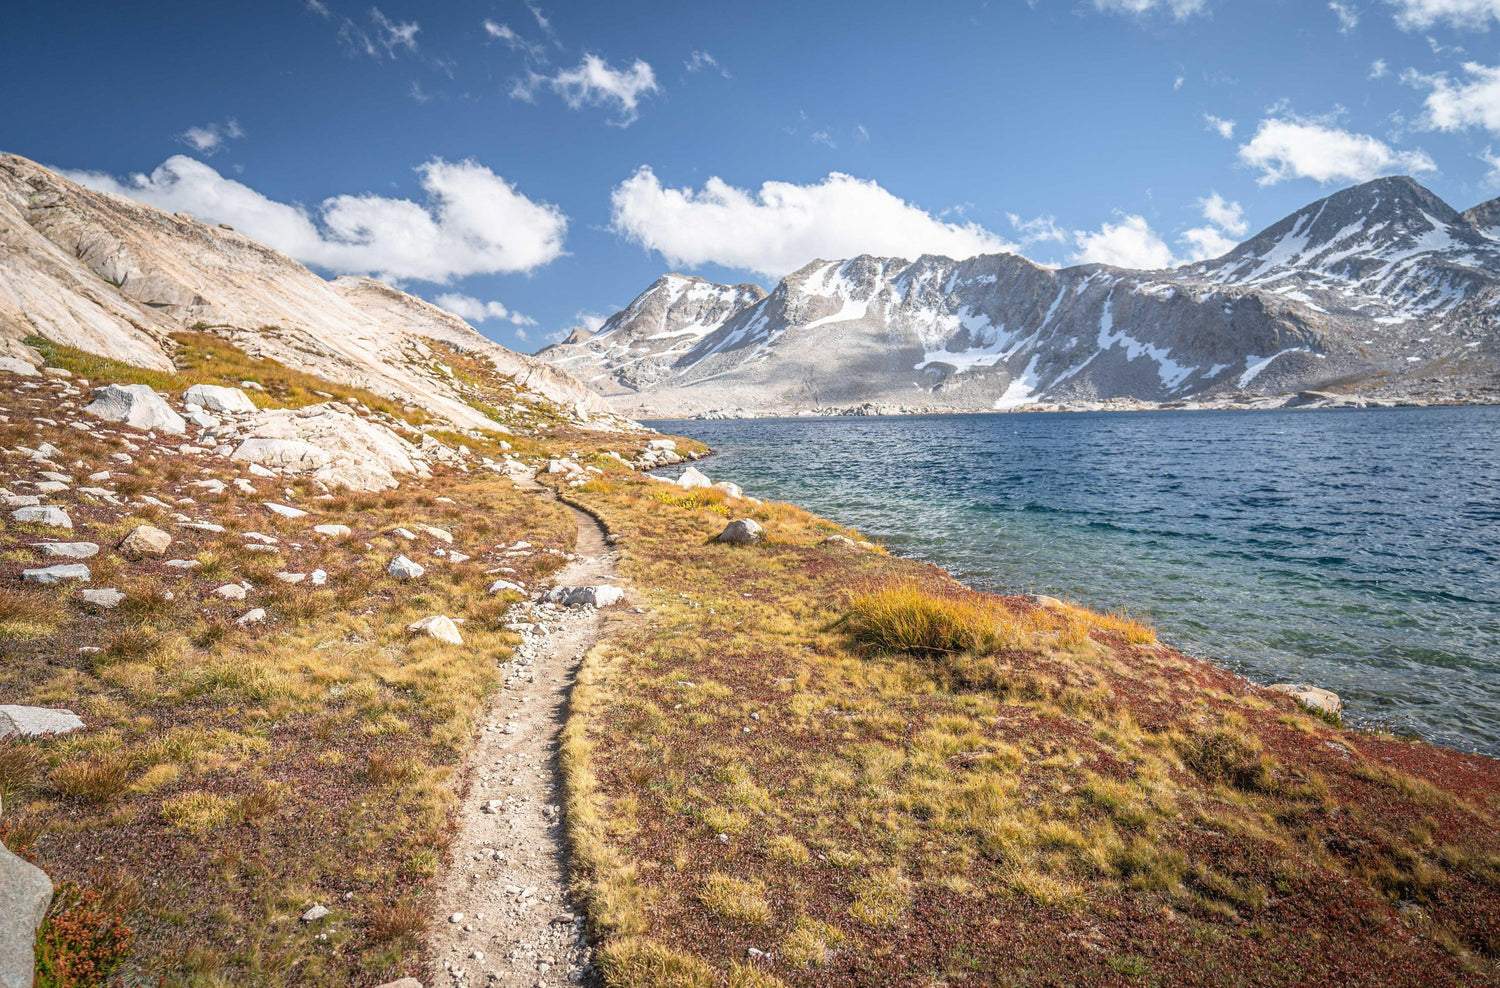 Fine photographic print of the Pacific Crest Trail meandering along a cold alpine lake in the High Sierra Mountain Range.